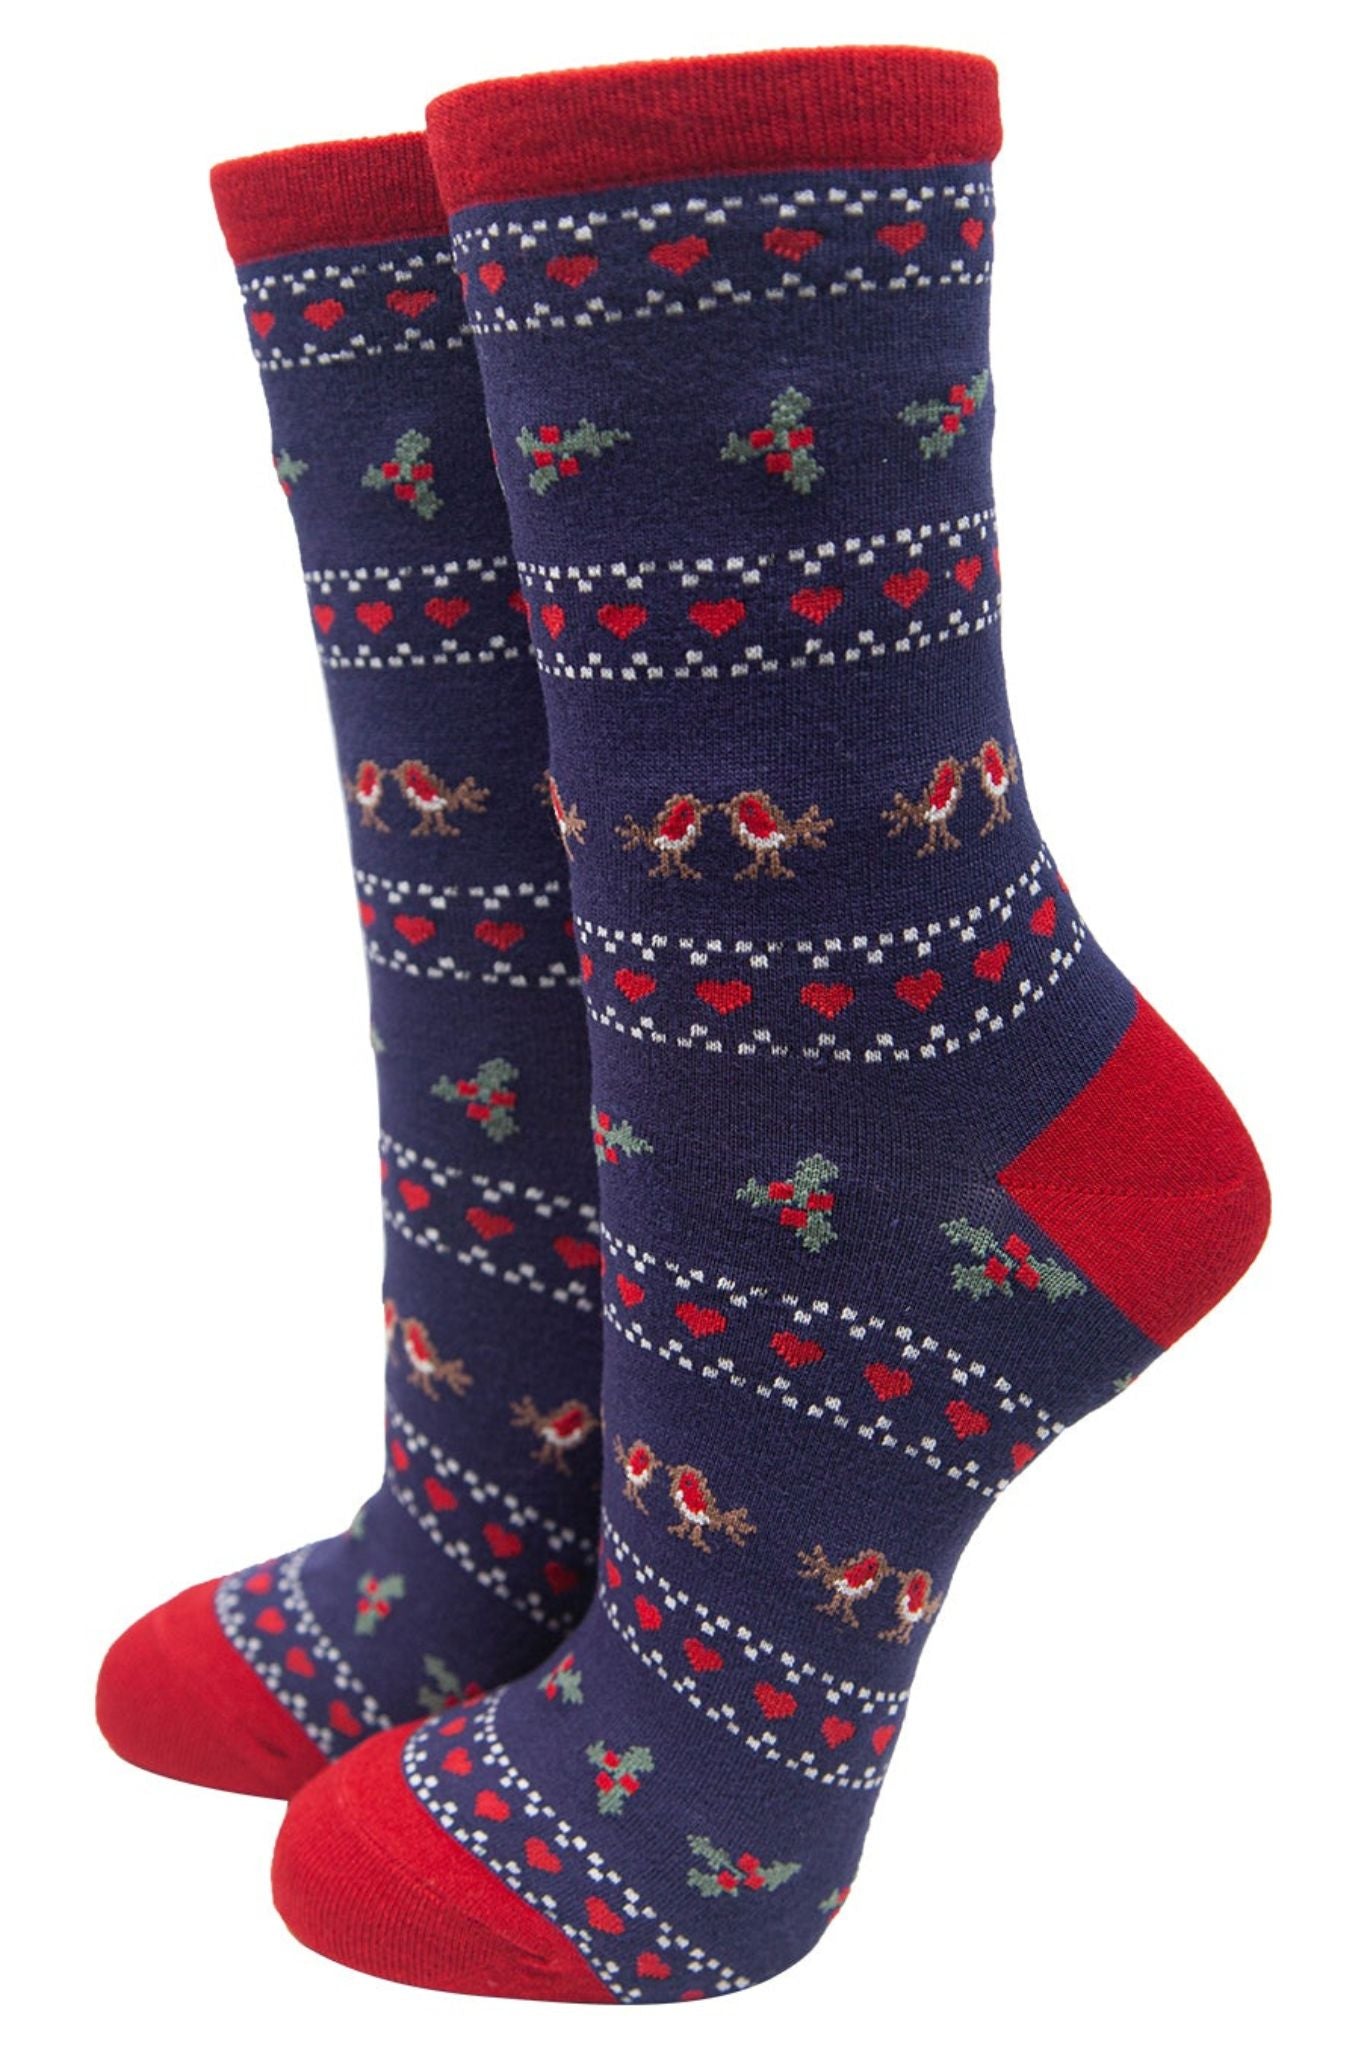 nevy blue and red bamboo socks featuring robin birds, love hearts in a fair isle style